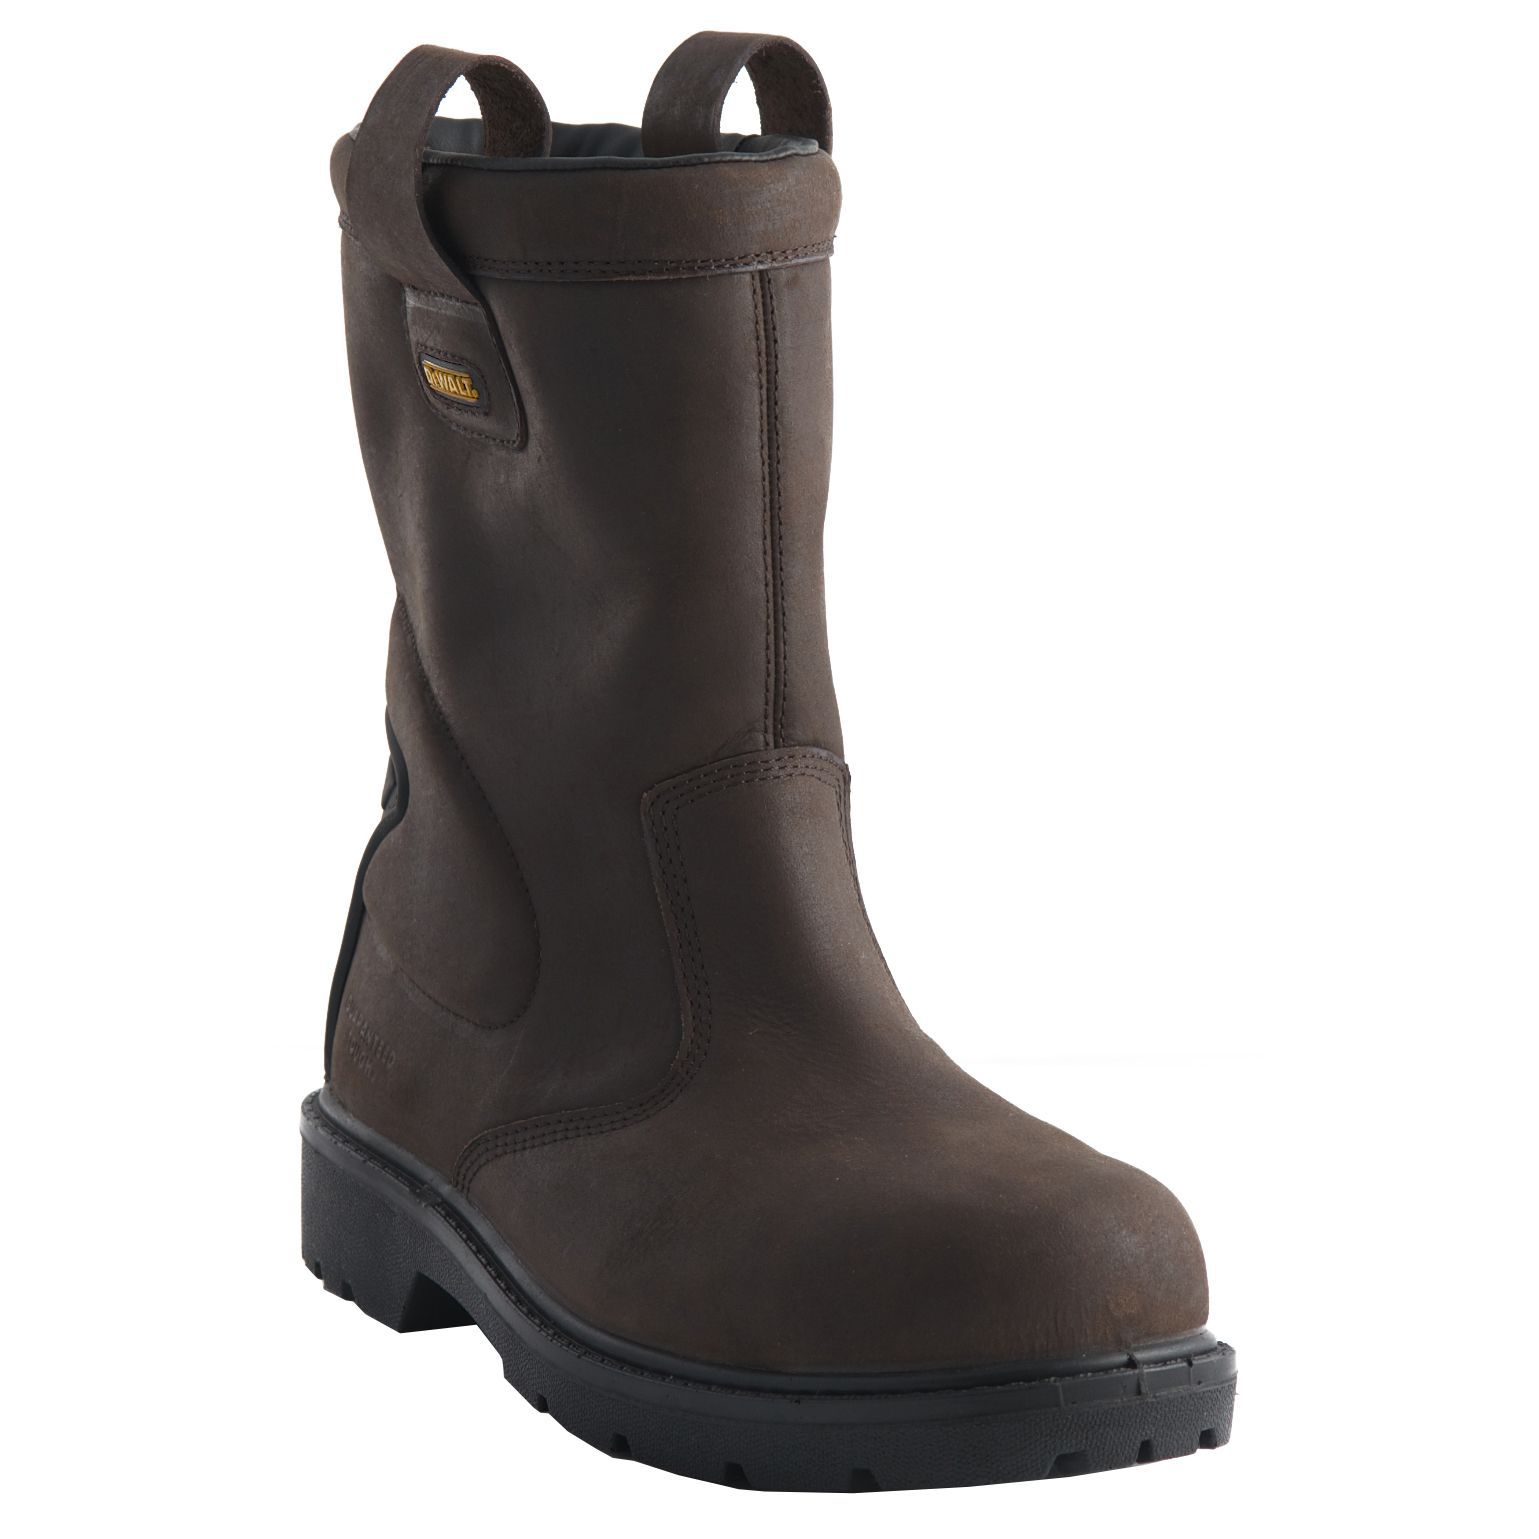 brown rigger boots